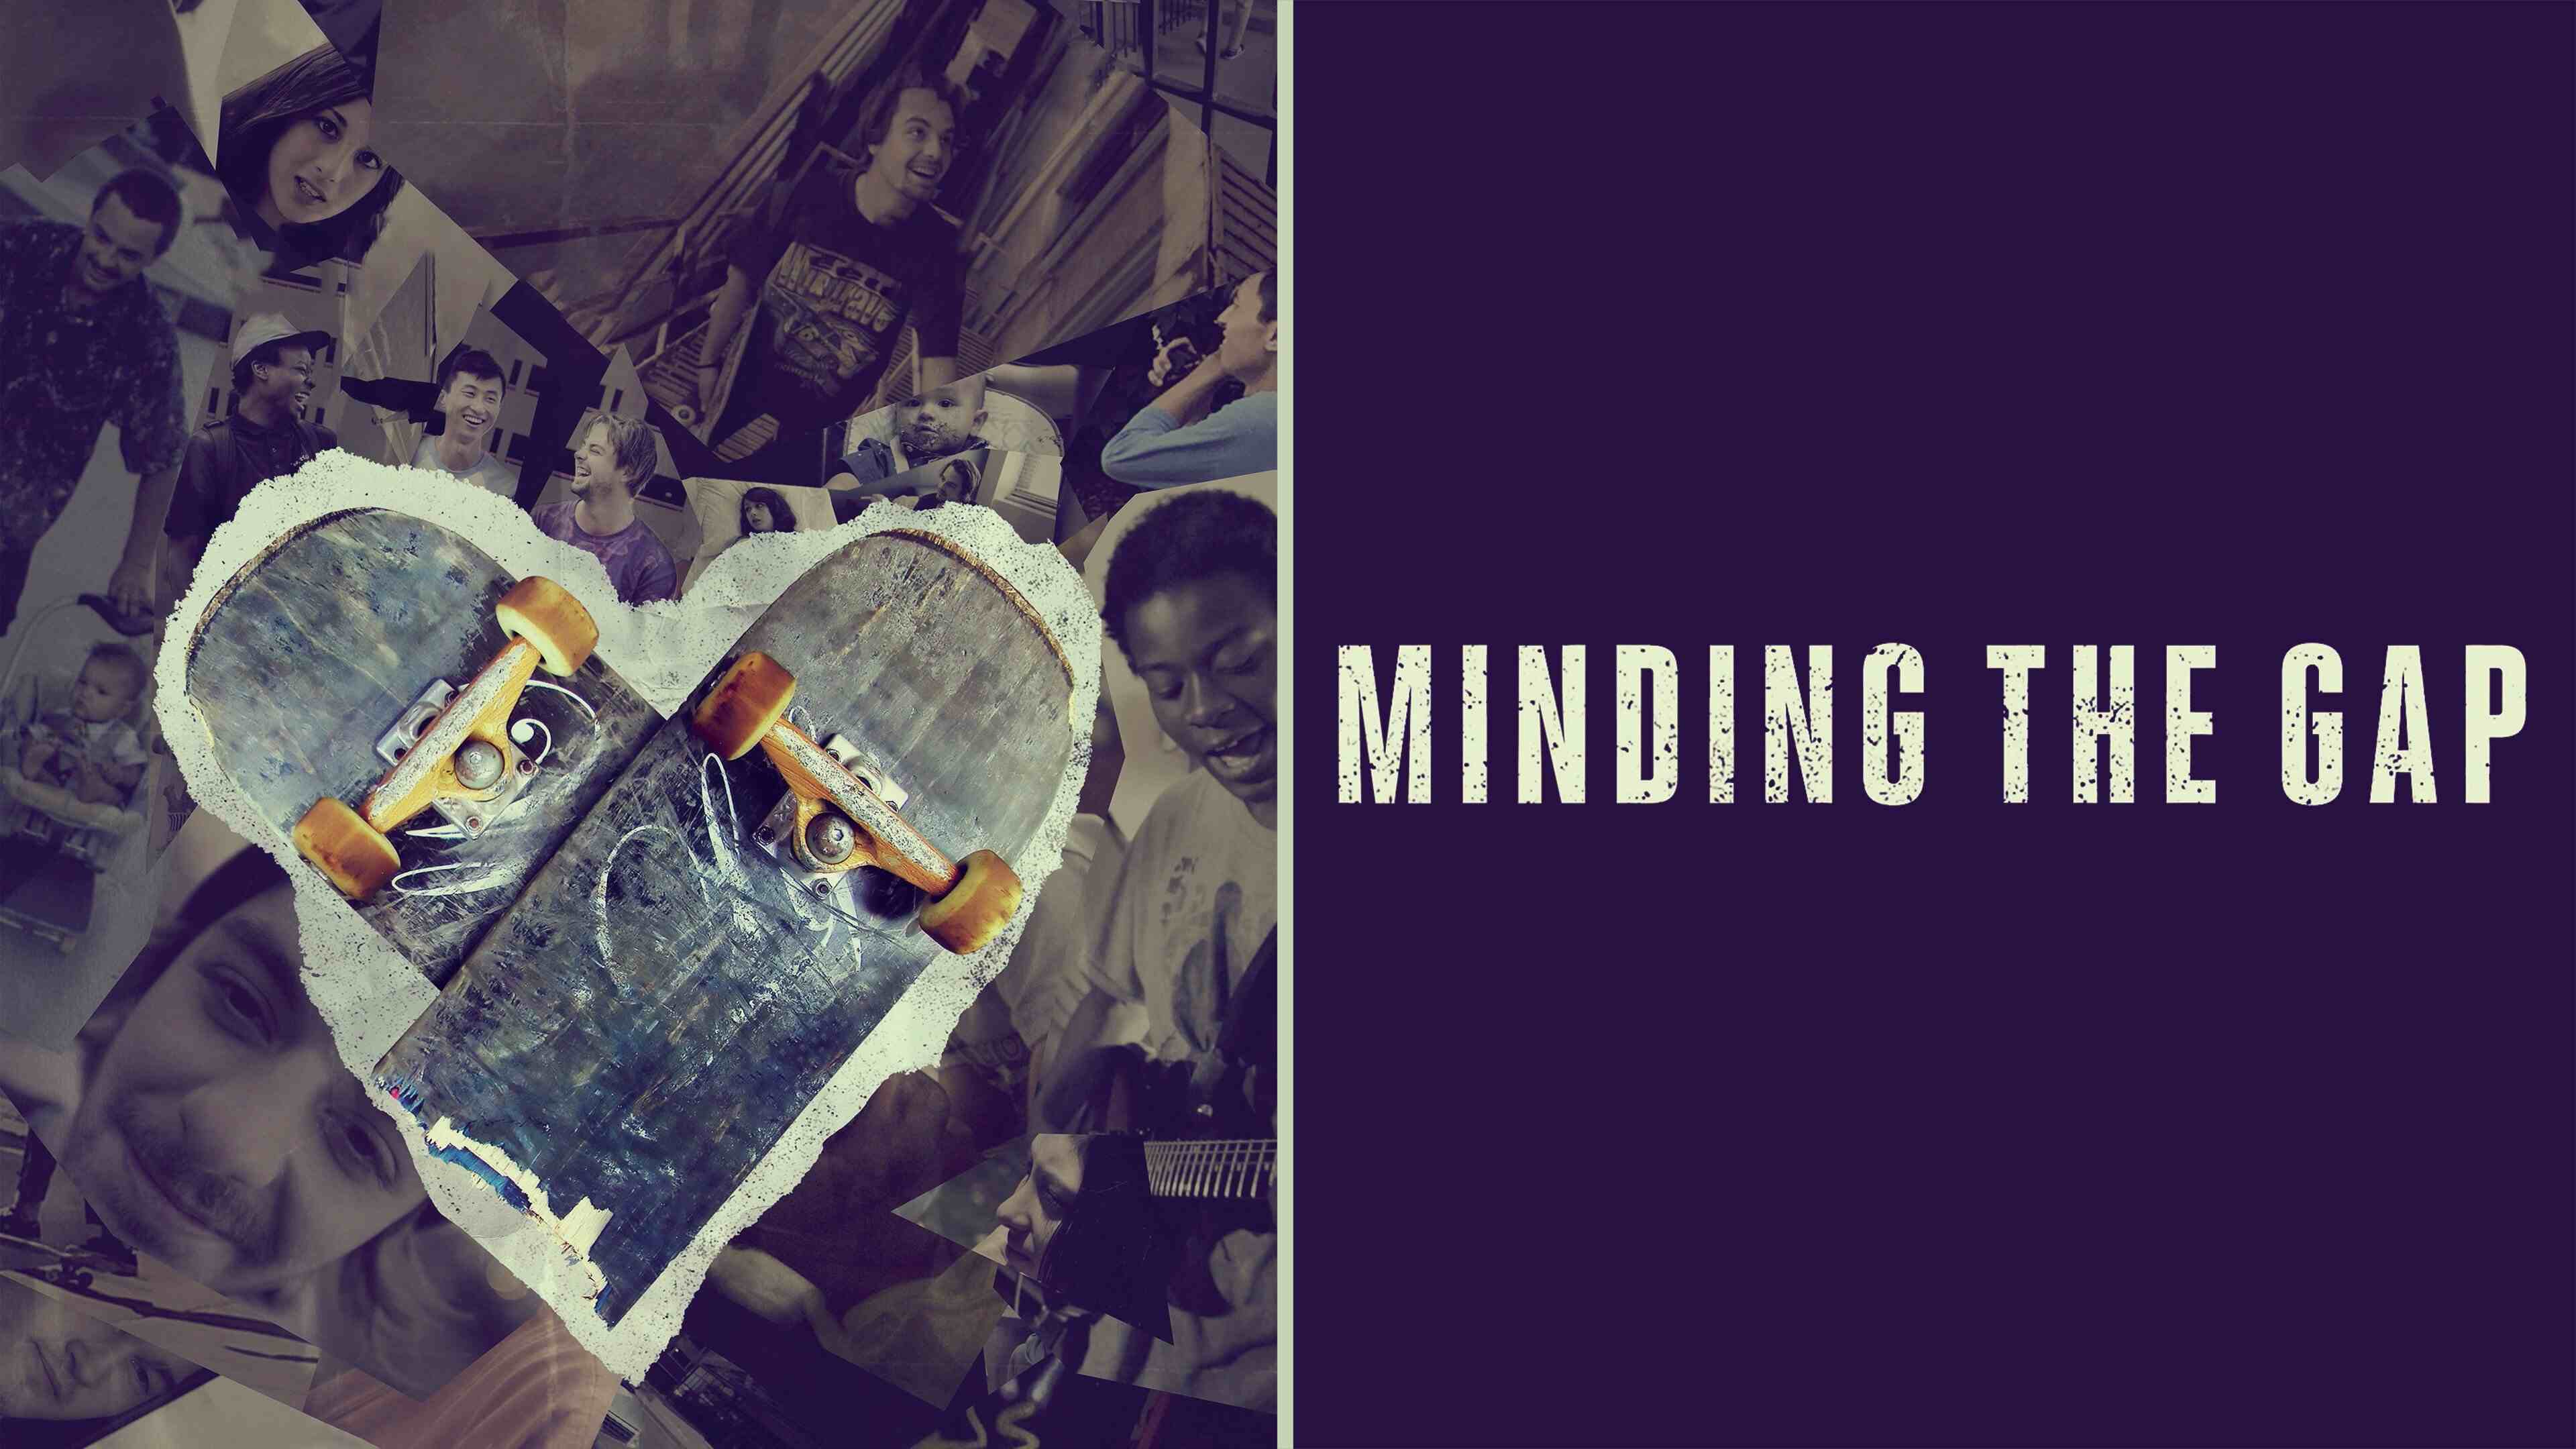 41-facts-about-the-movie-minding-the-gap